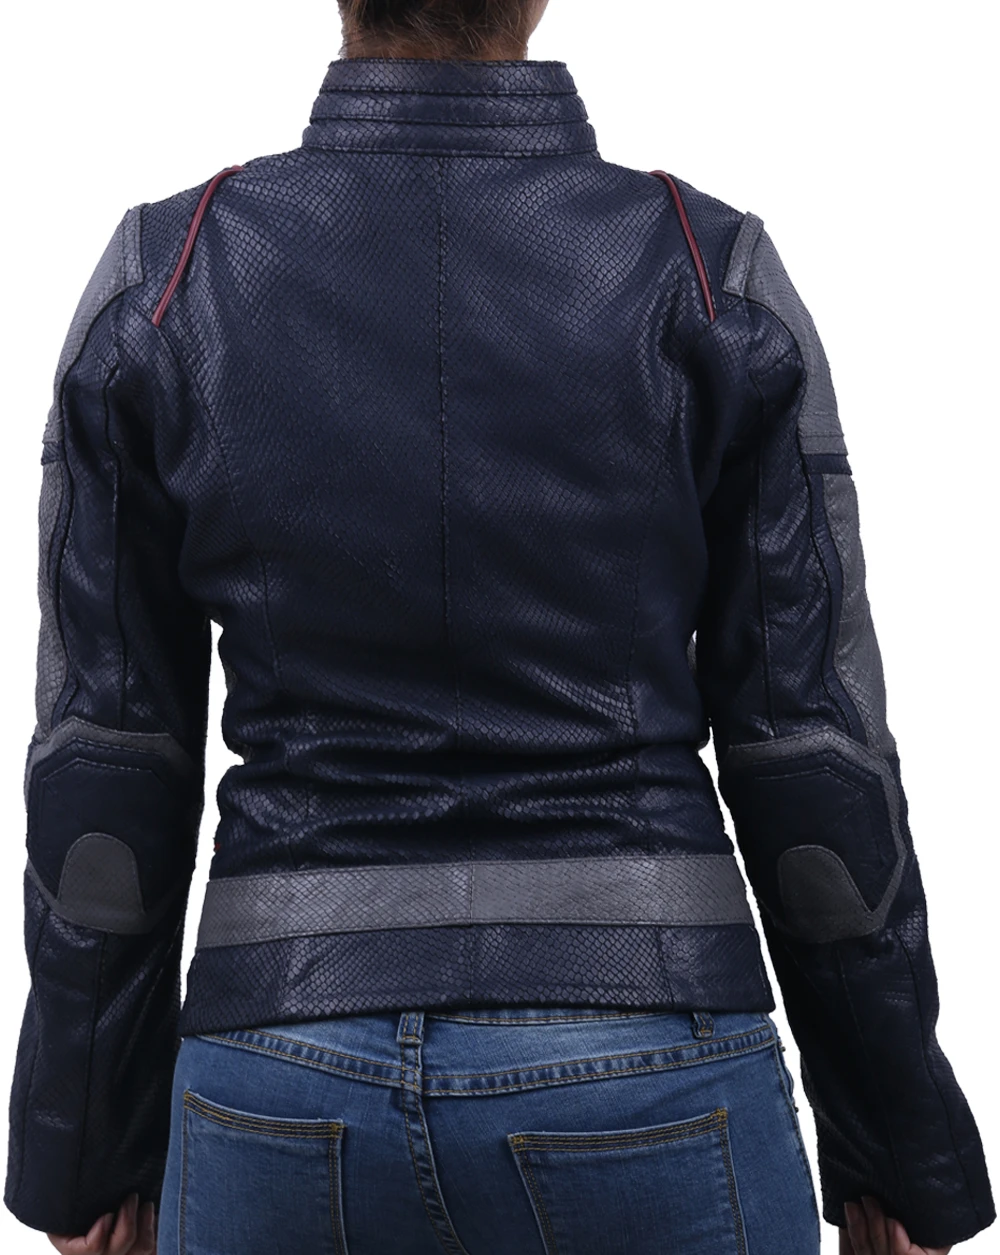 Hope Van Dyne Ant-man And The Wasp Evangeline Lilly Jacket